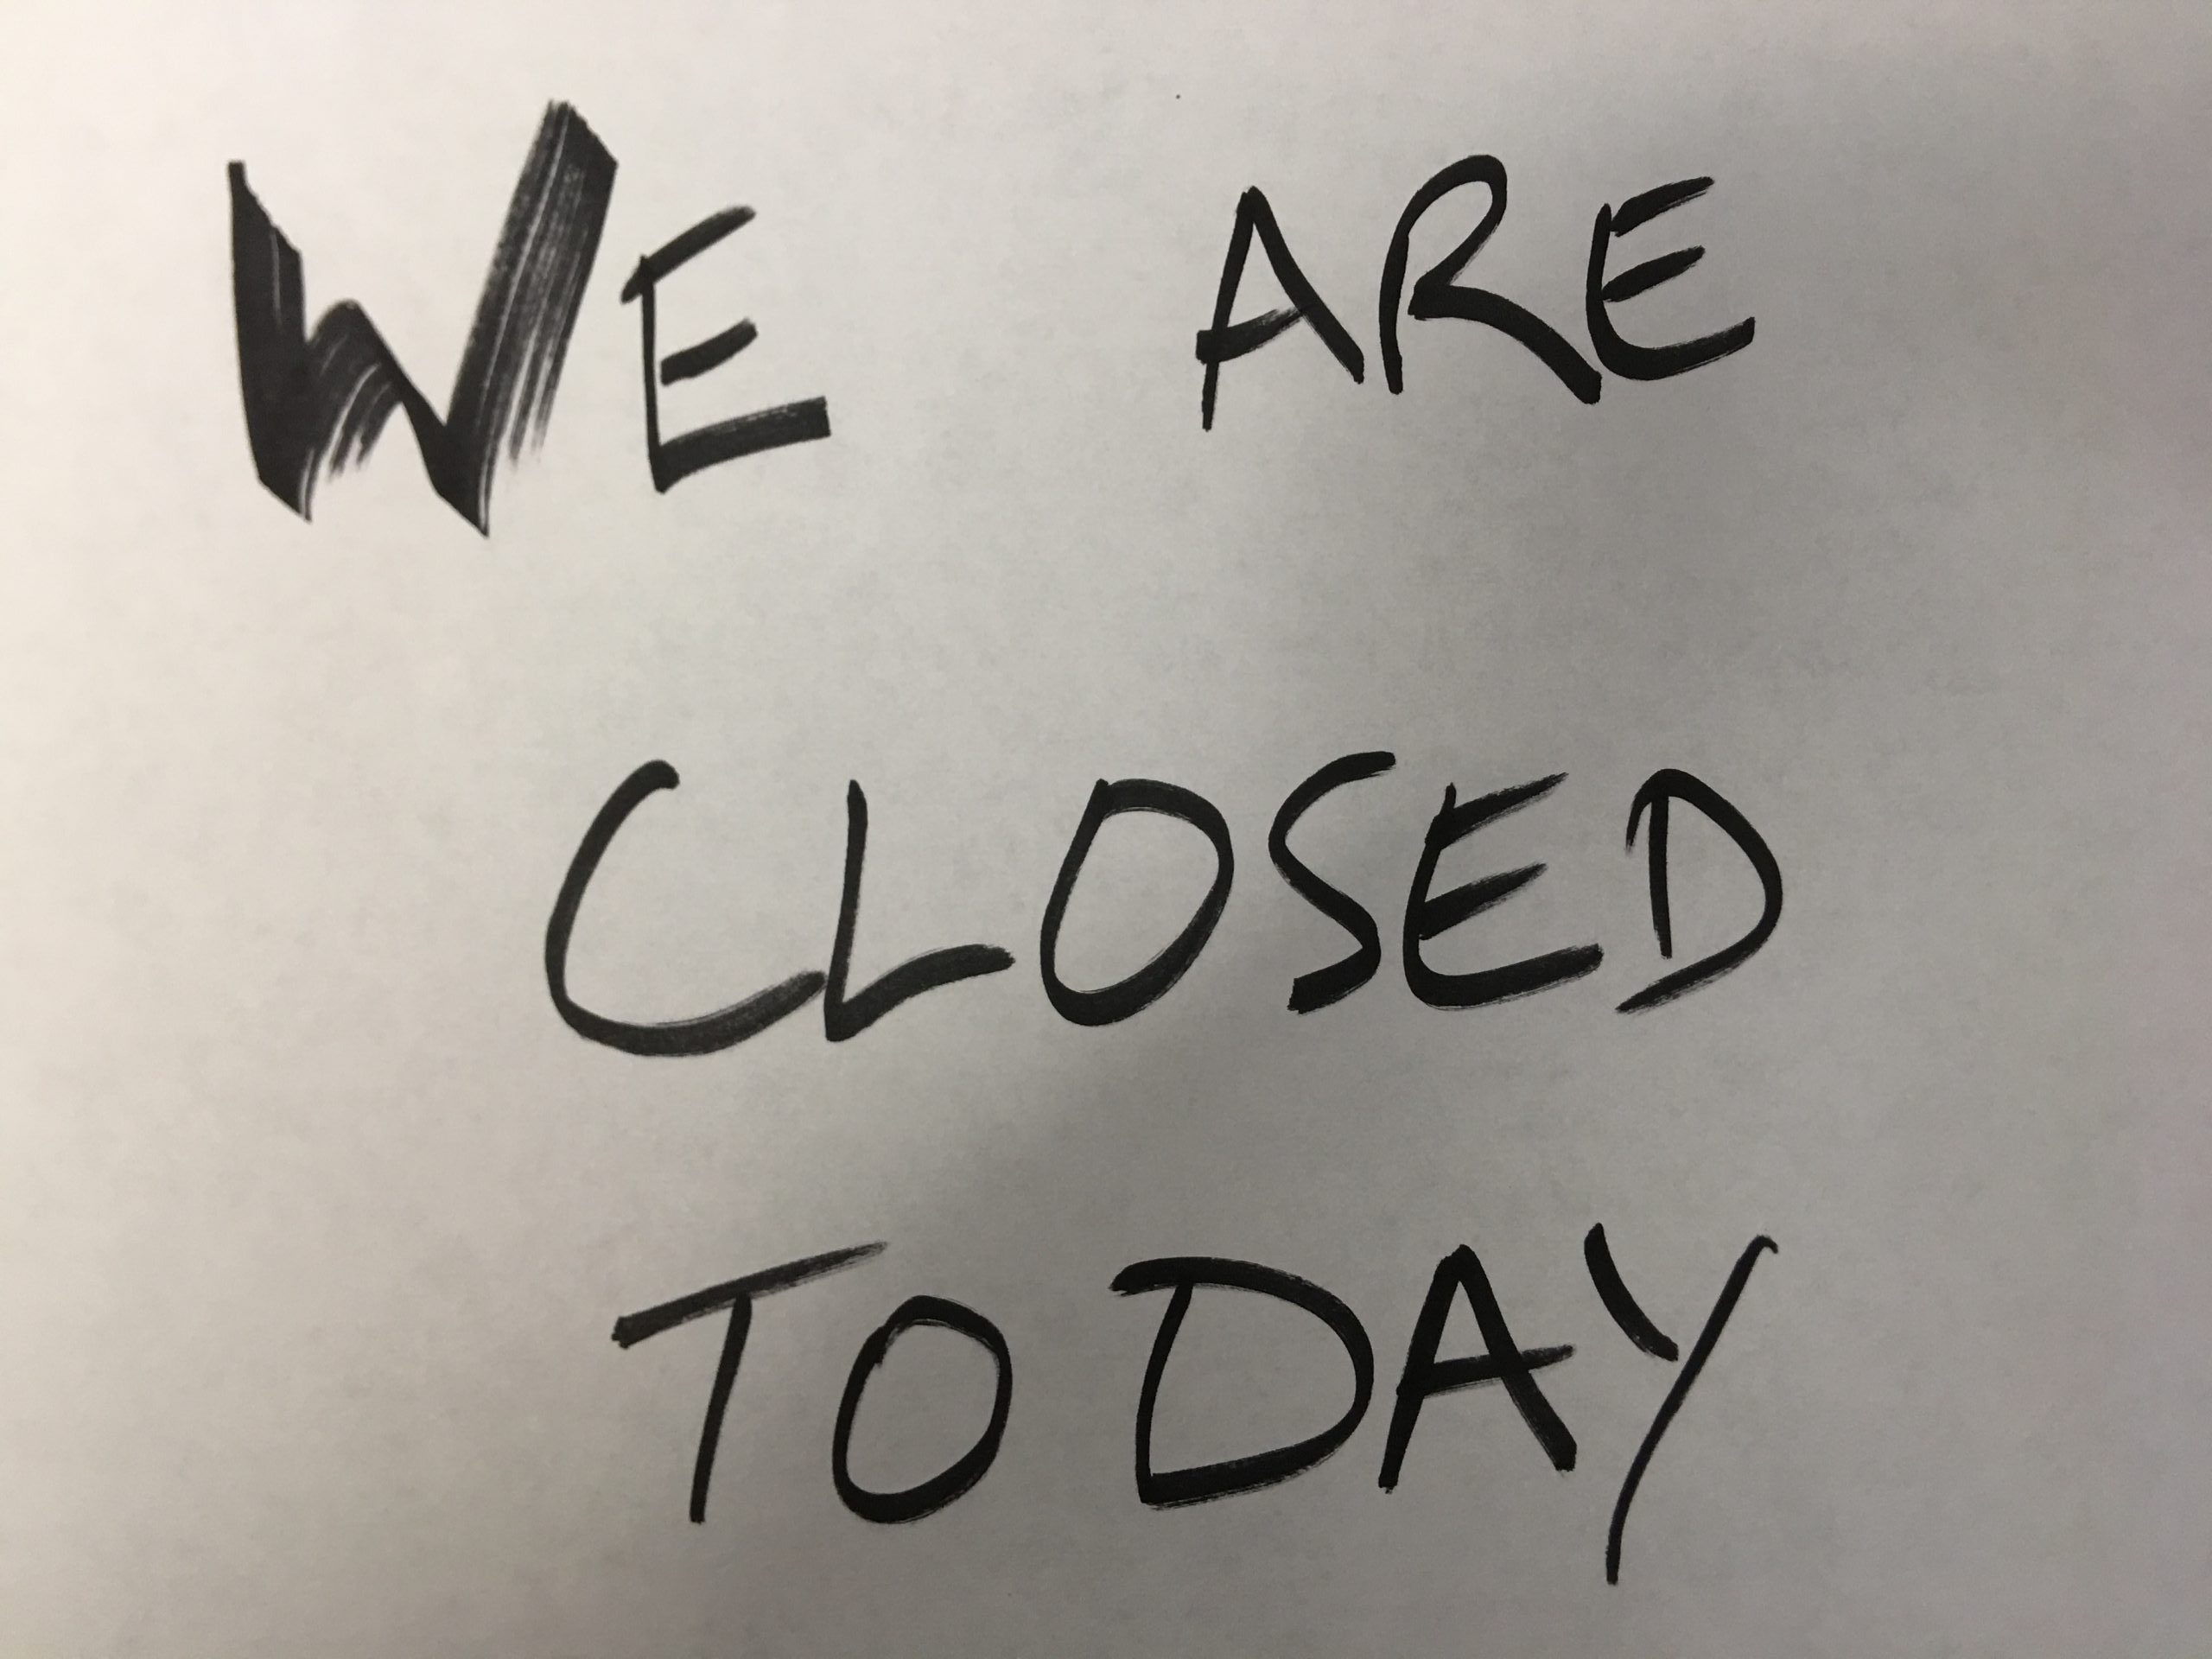 Closed for a day